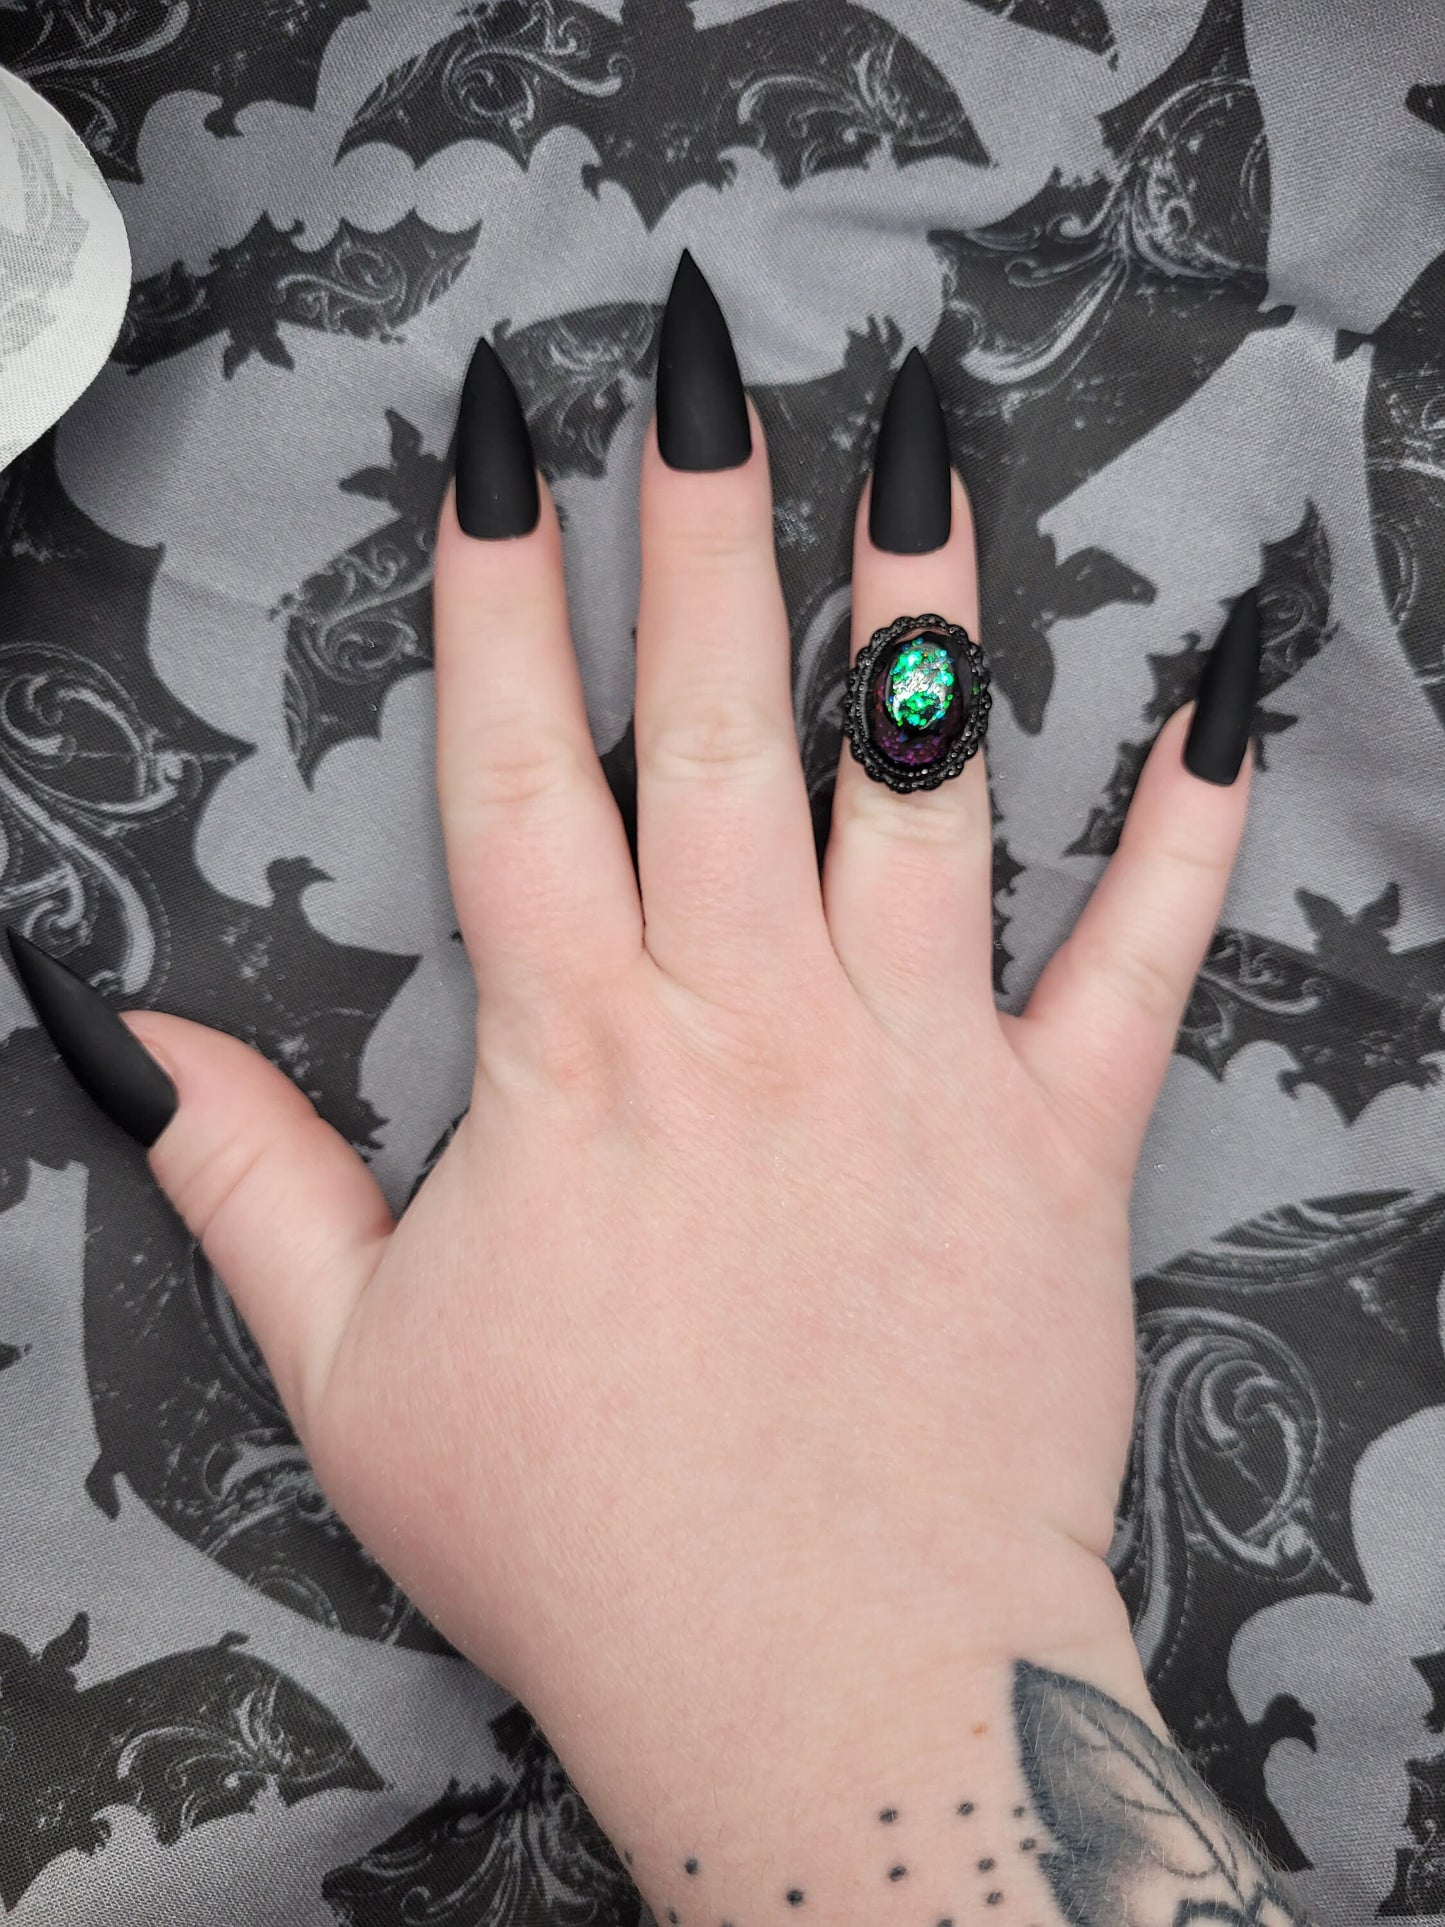 Handmade Unique Adjustable Witchy Goth Black Resin Cabochon Ring with Multichrome Purple Green Teal Flake Glitter